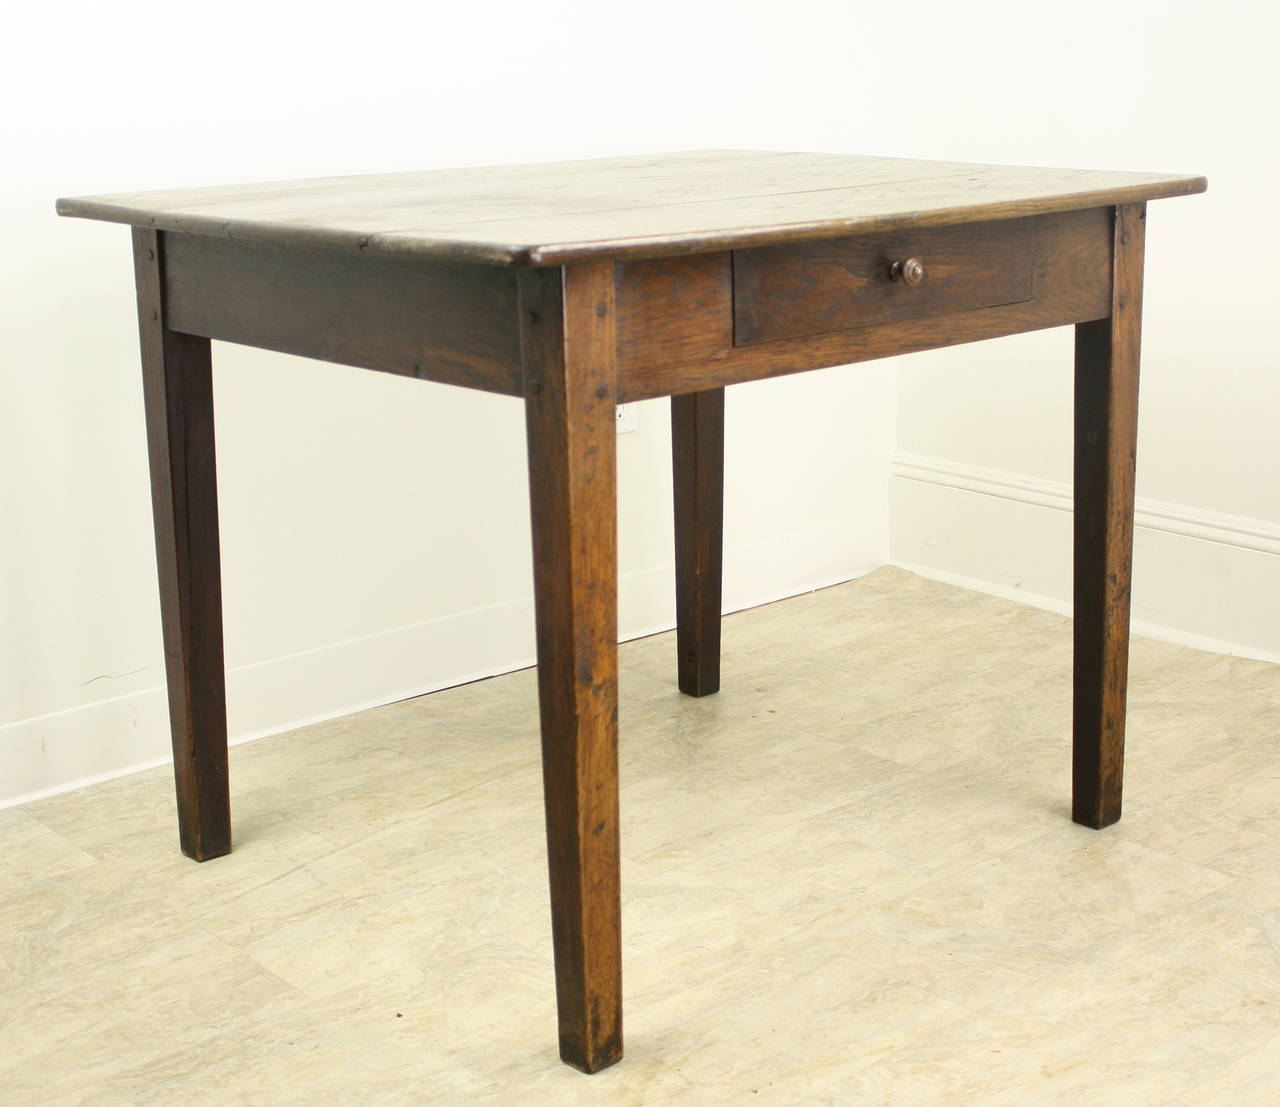 A handsome dark chestnut writing table with generous proportions on sturdy tapered legs.  The wood has nice color and patina, and the extra depth of the piece makes it an elegant and functional work surface.  One single divided drawer. At 24